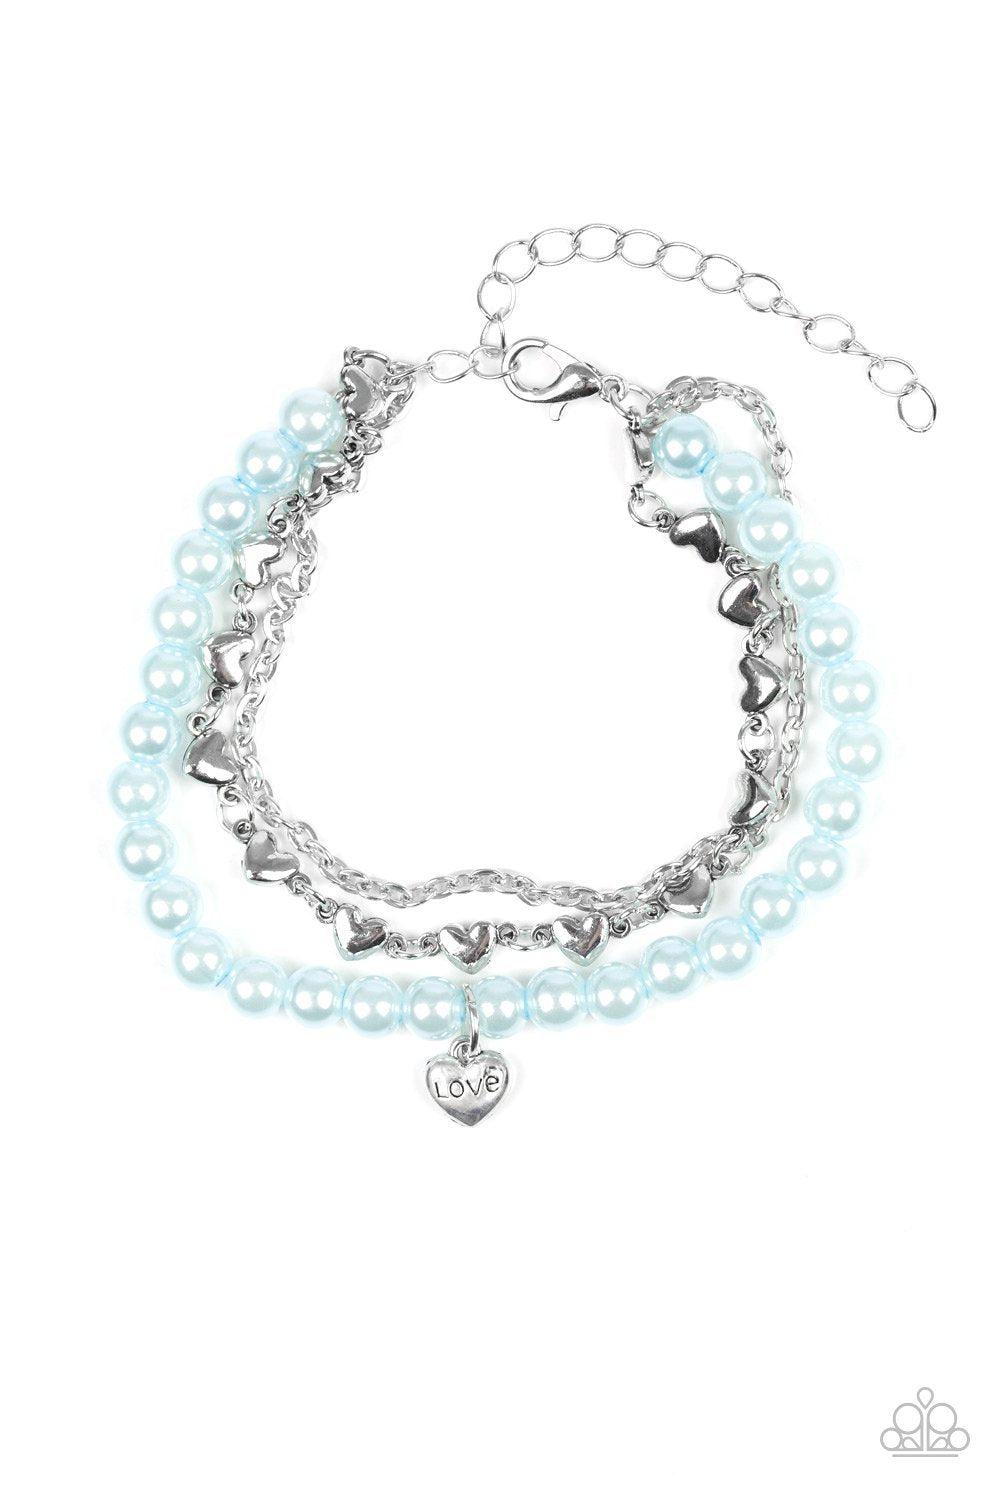 Love Like You Mean It Blue Pearl Bracelet - Paparazzi Accessories- lightbox - CarasShop.com - $5 Jewelry by Cara Jewels